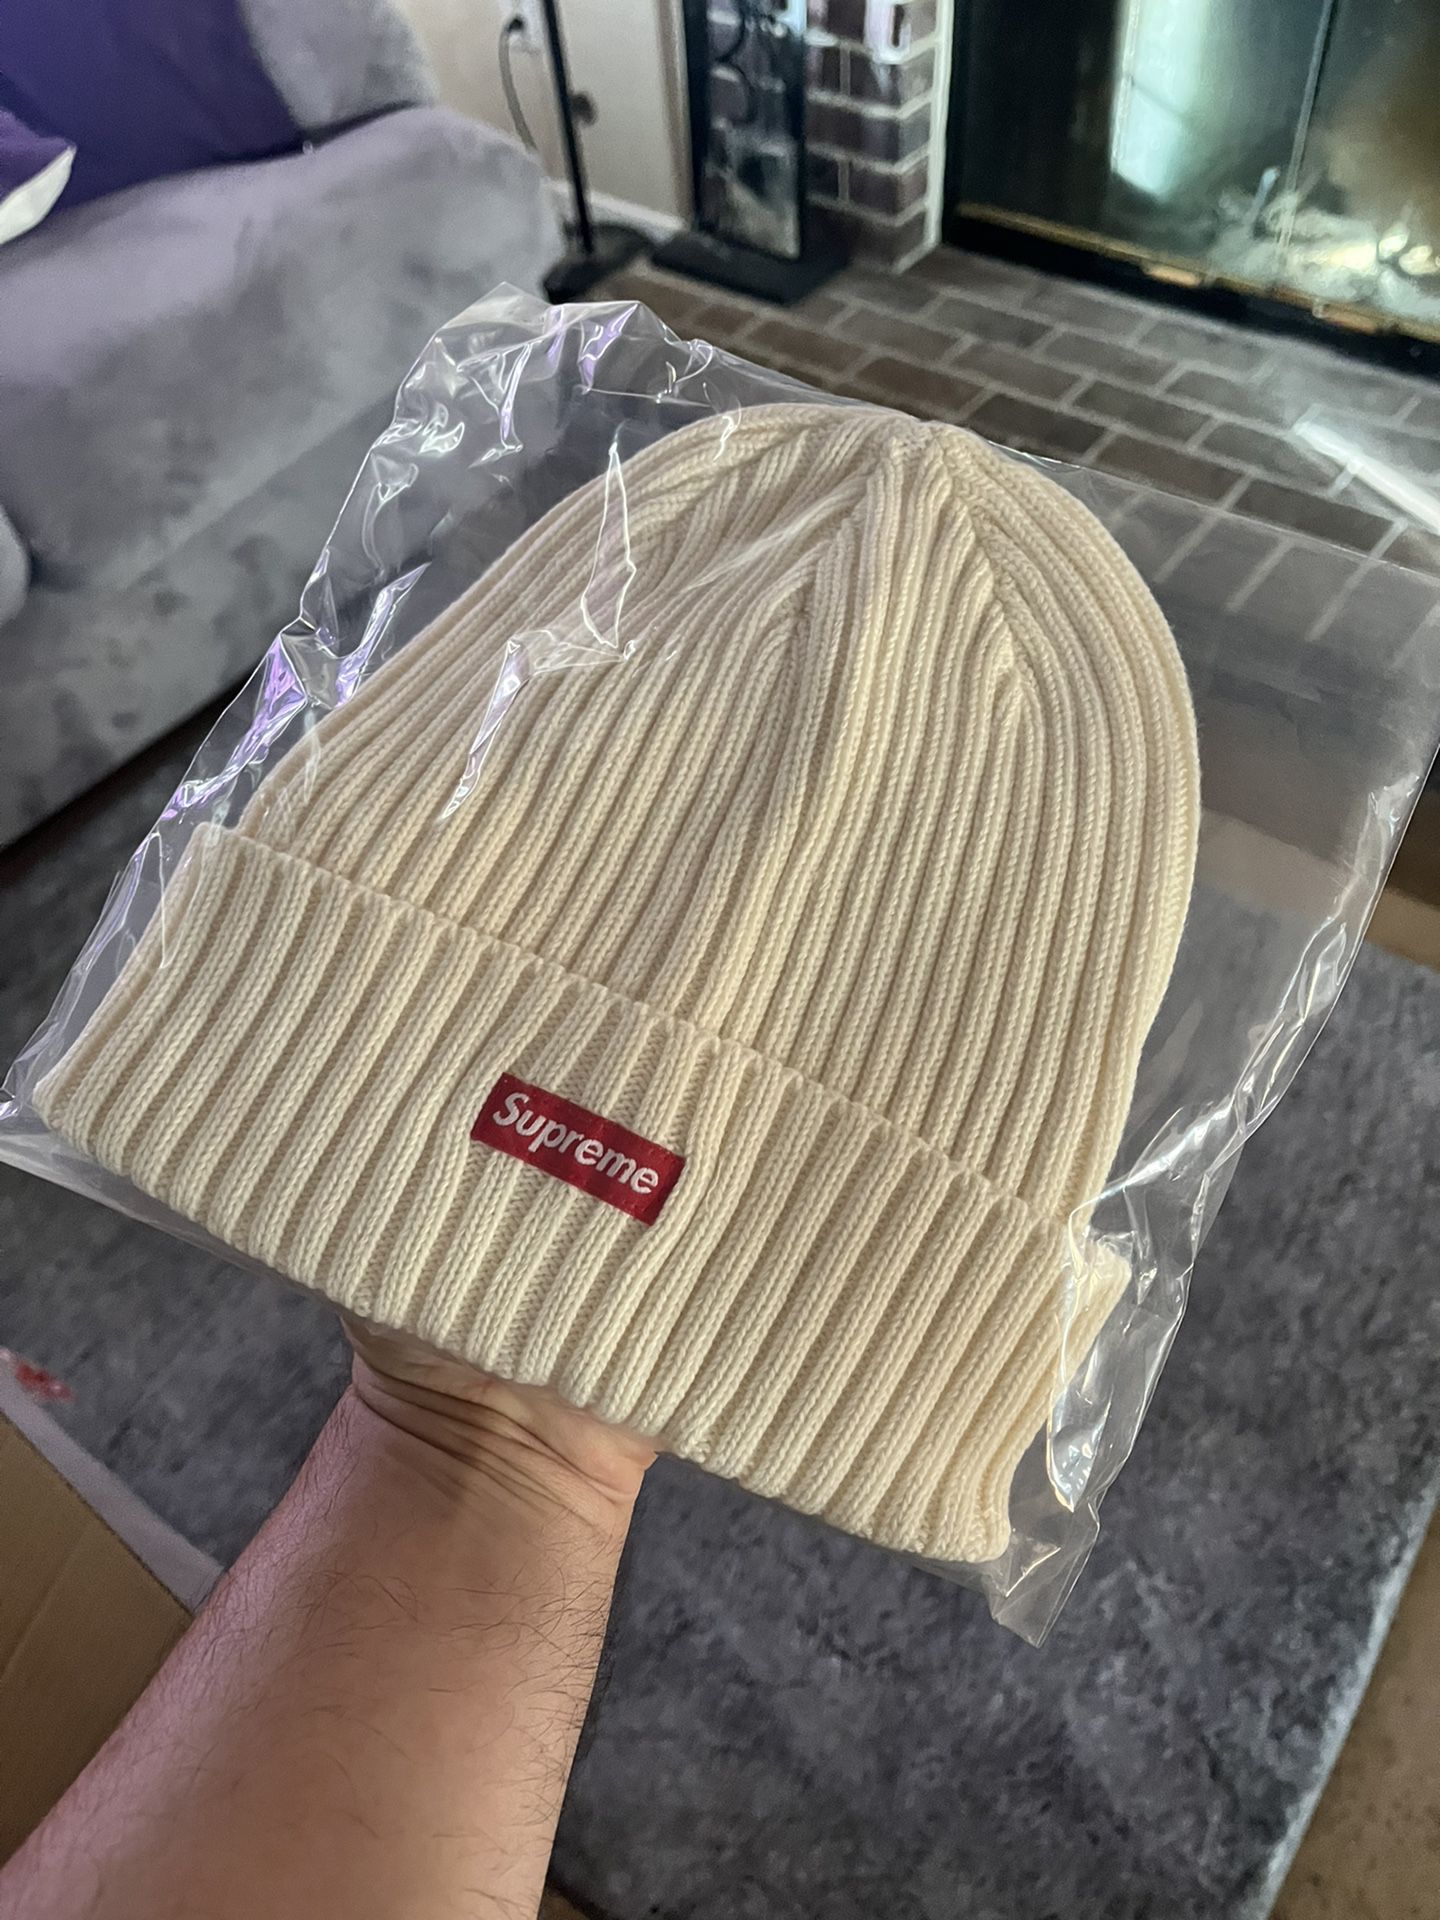 Supreme Overdyed Beanie / Unisex / One Size Fits All / Beige / Original / New